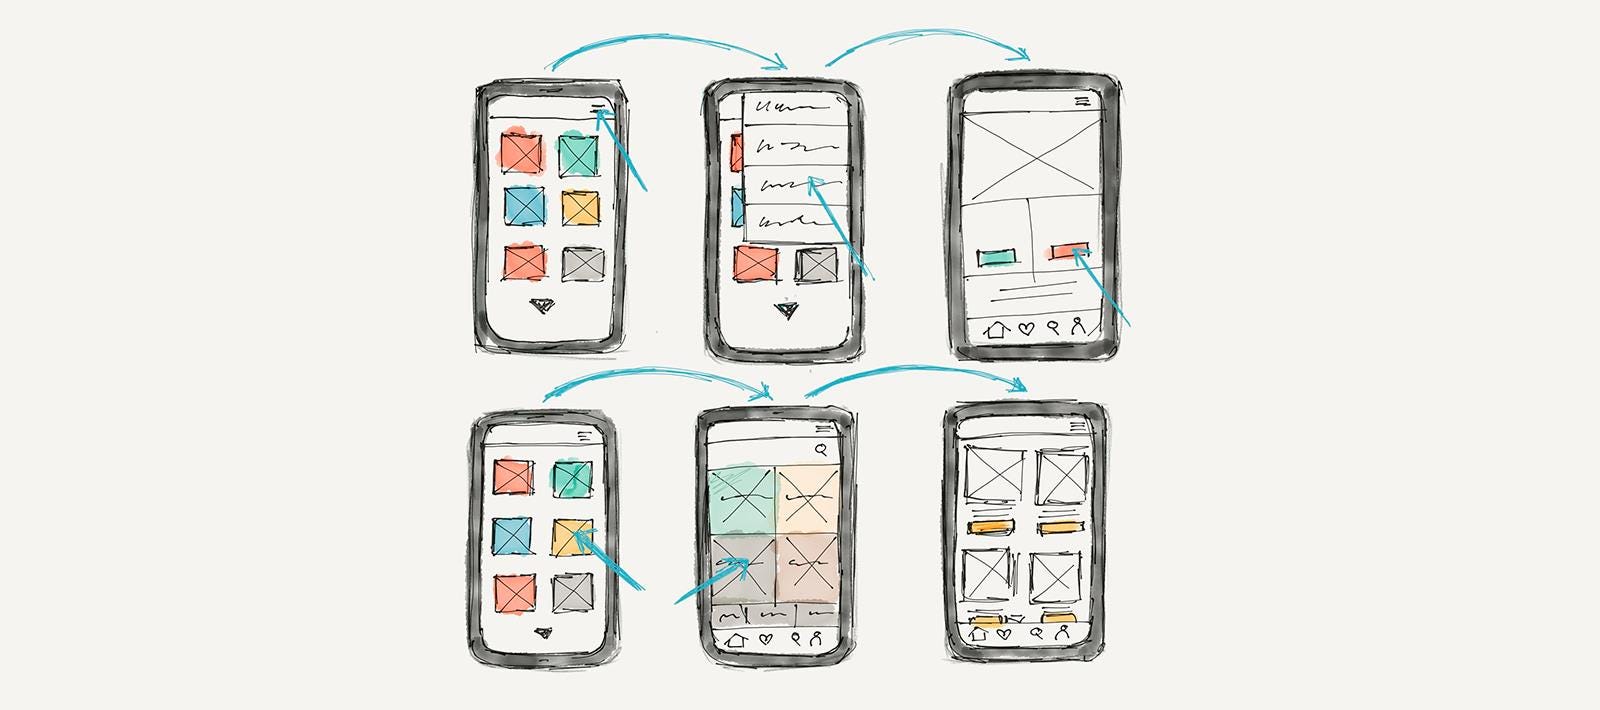 Mobile App UX Design Principles: 15 Rules for Creating Apps that Stick